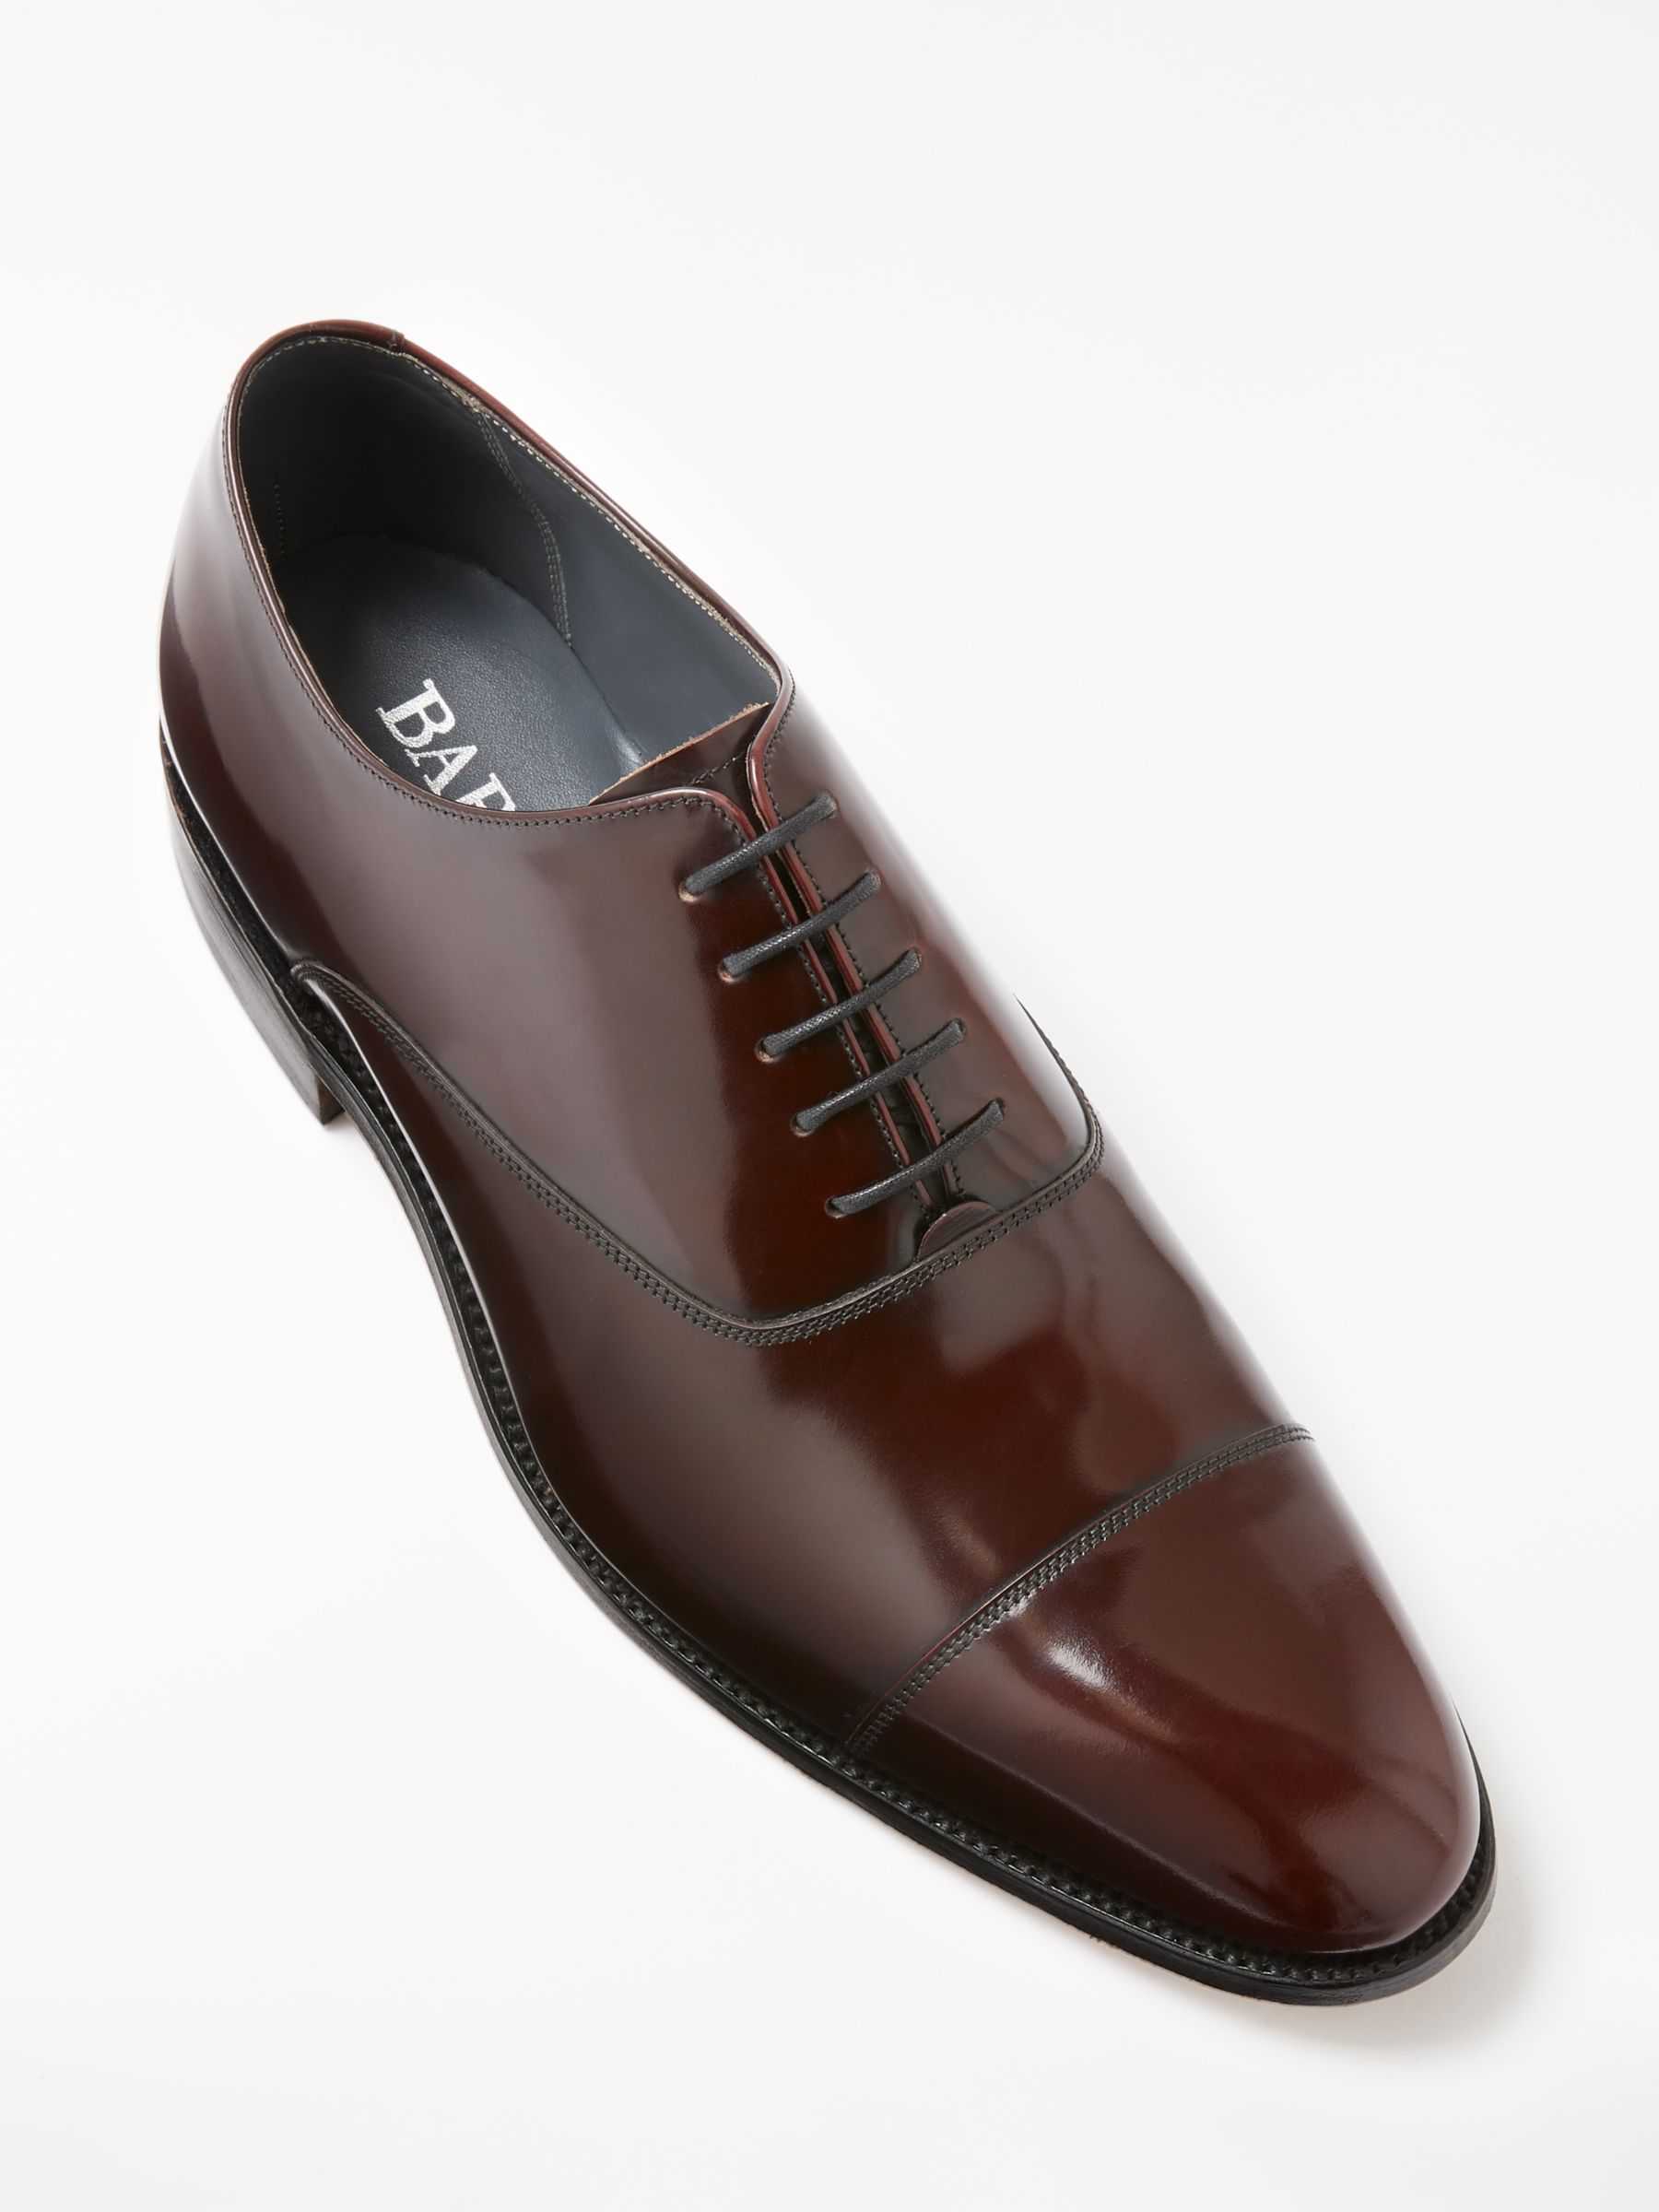 barker winsford oxford shoes